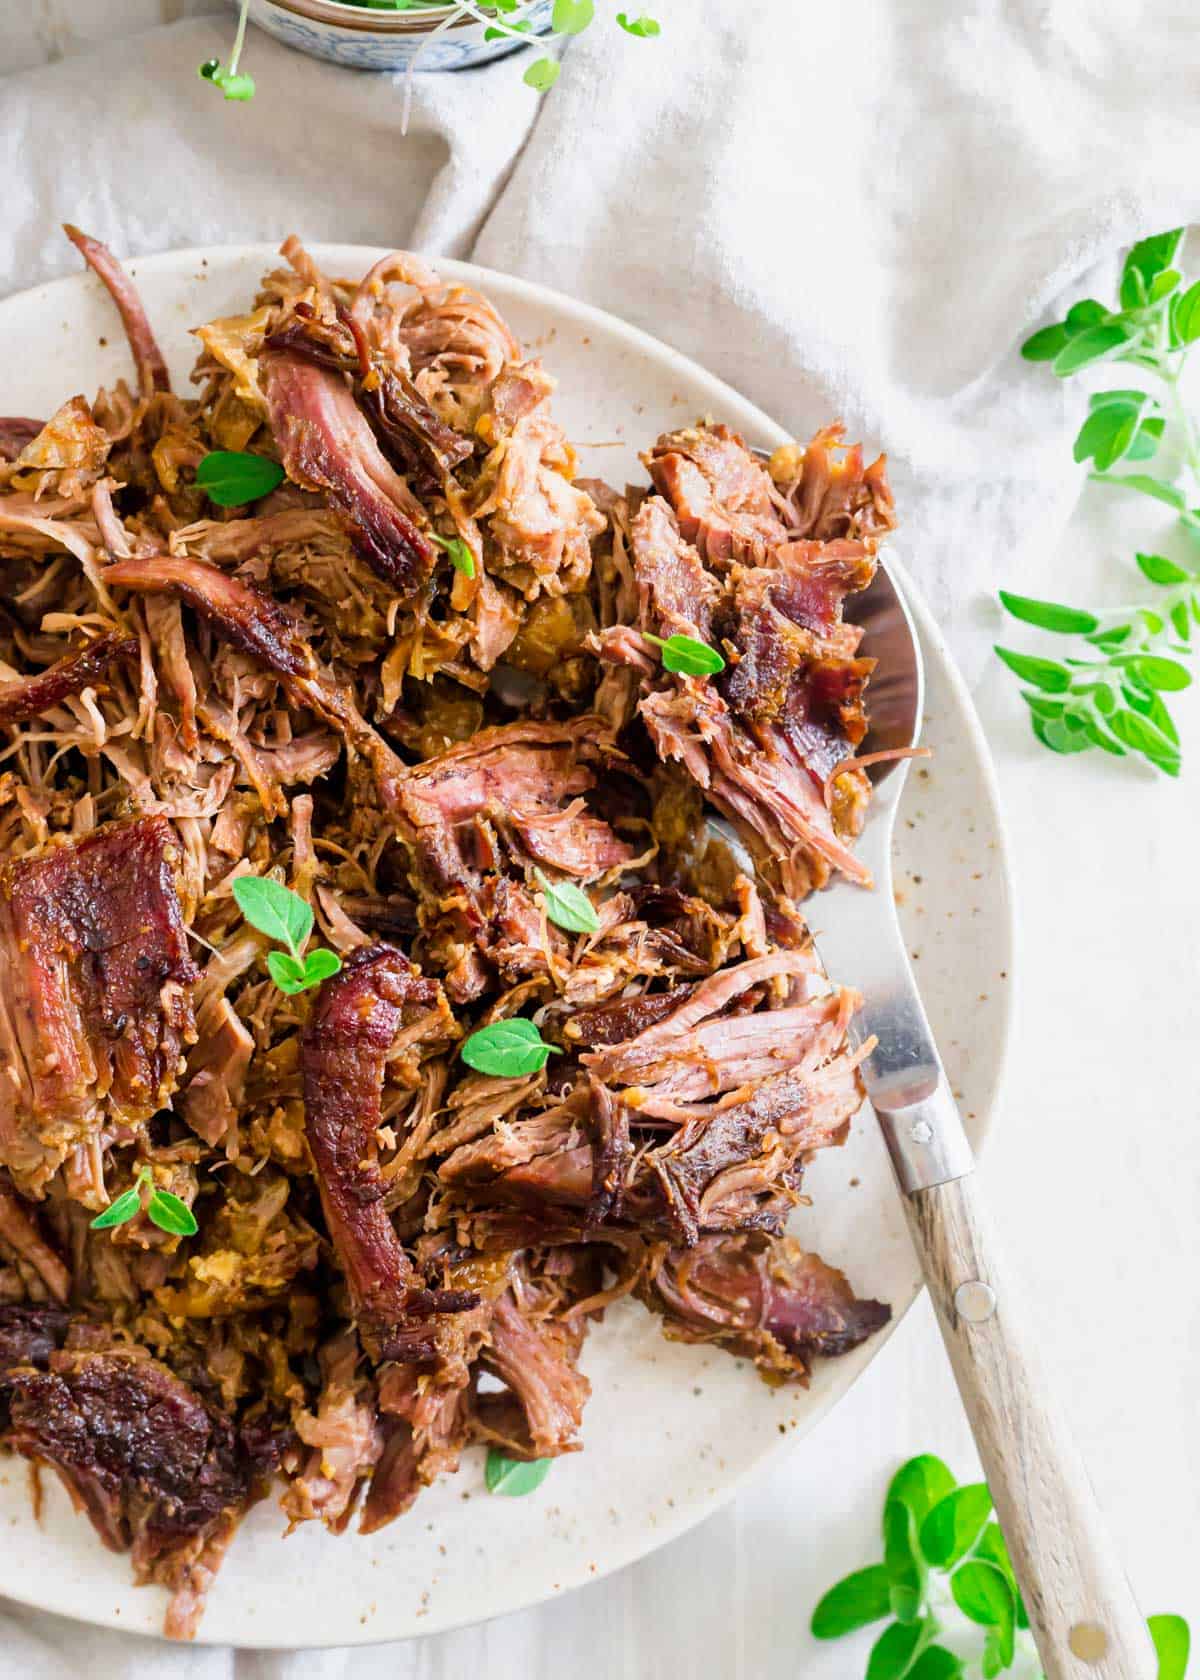 Learn how to braise a leg of lamb and use the tender, shredded meat in a variety of different ways.